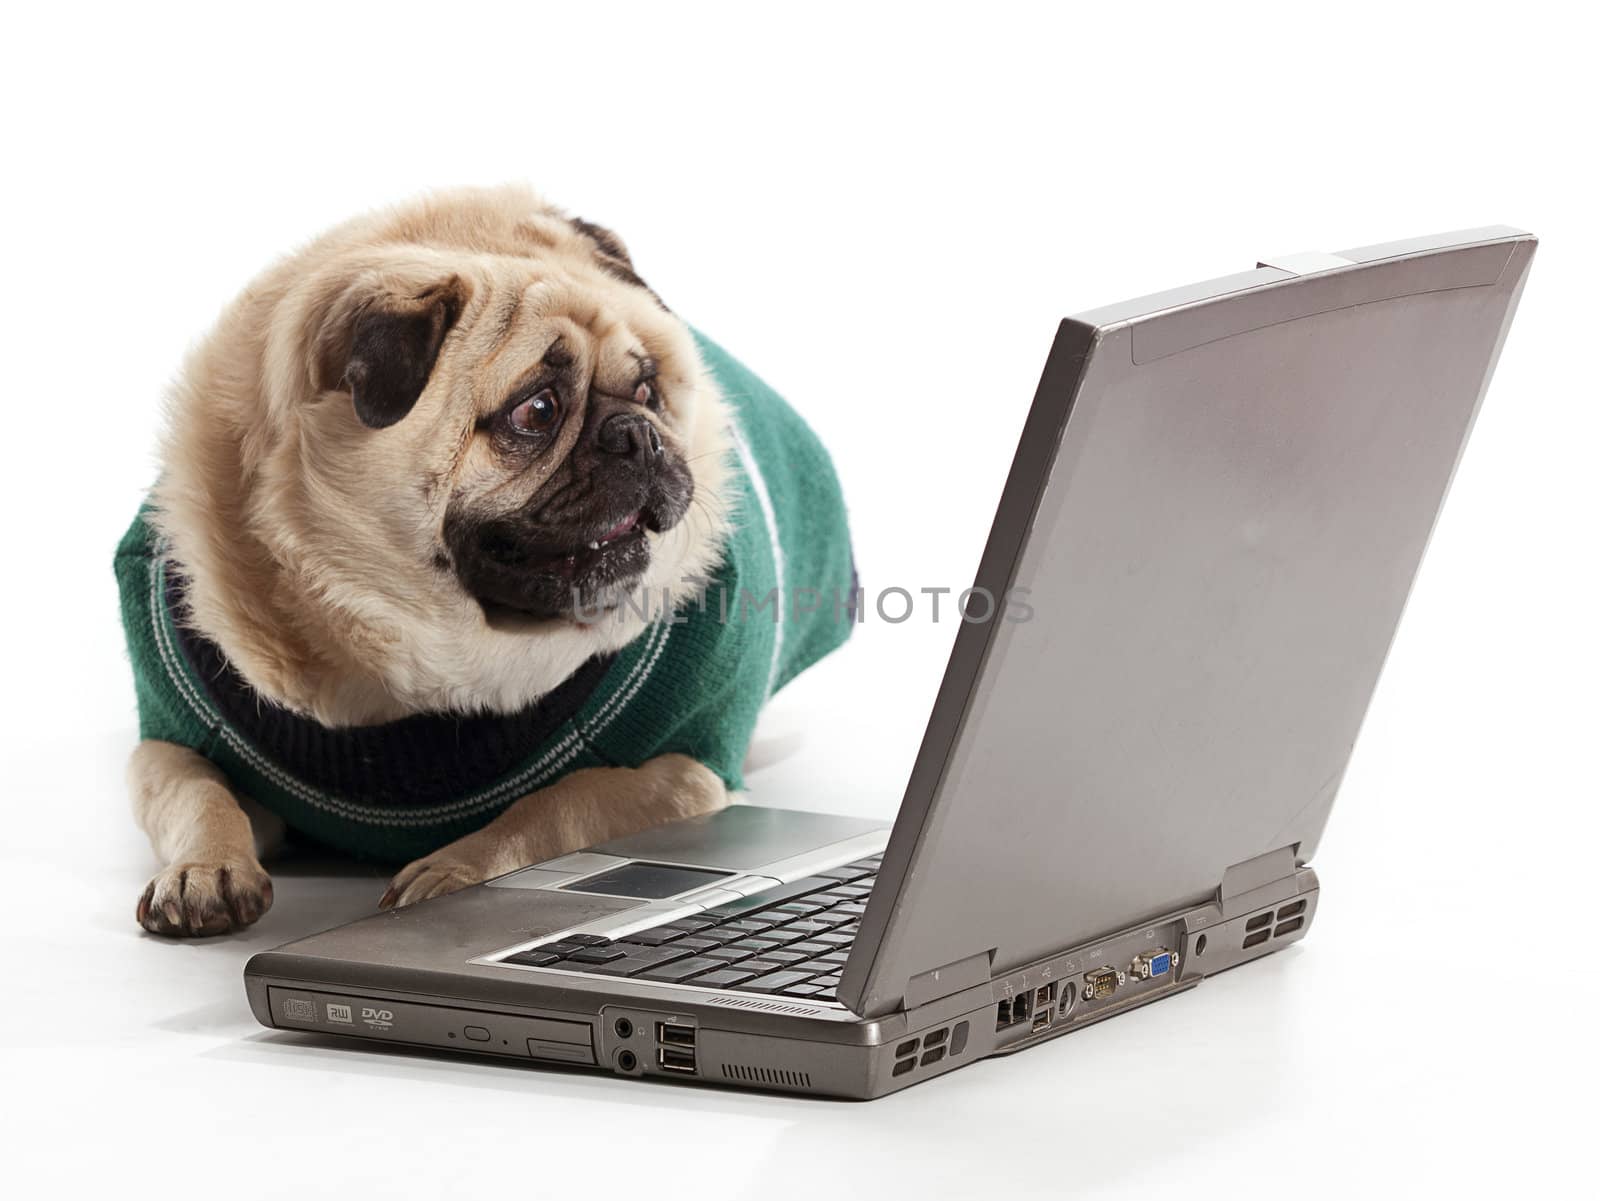 A pug that is scared of the internet